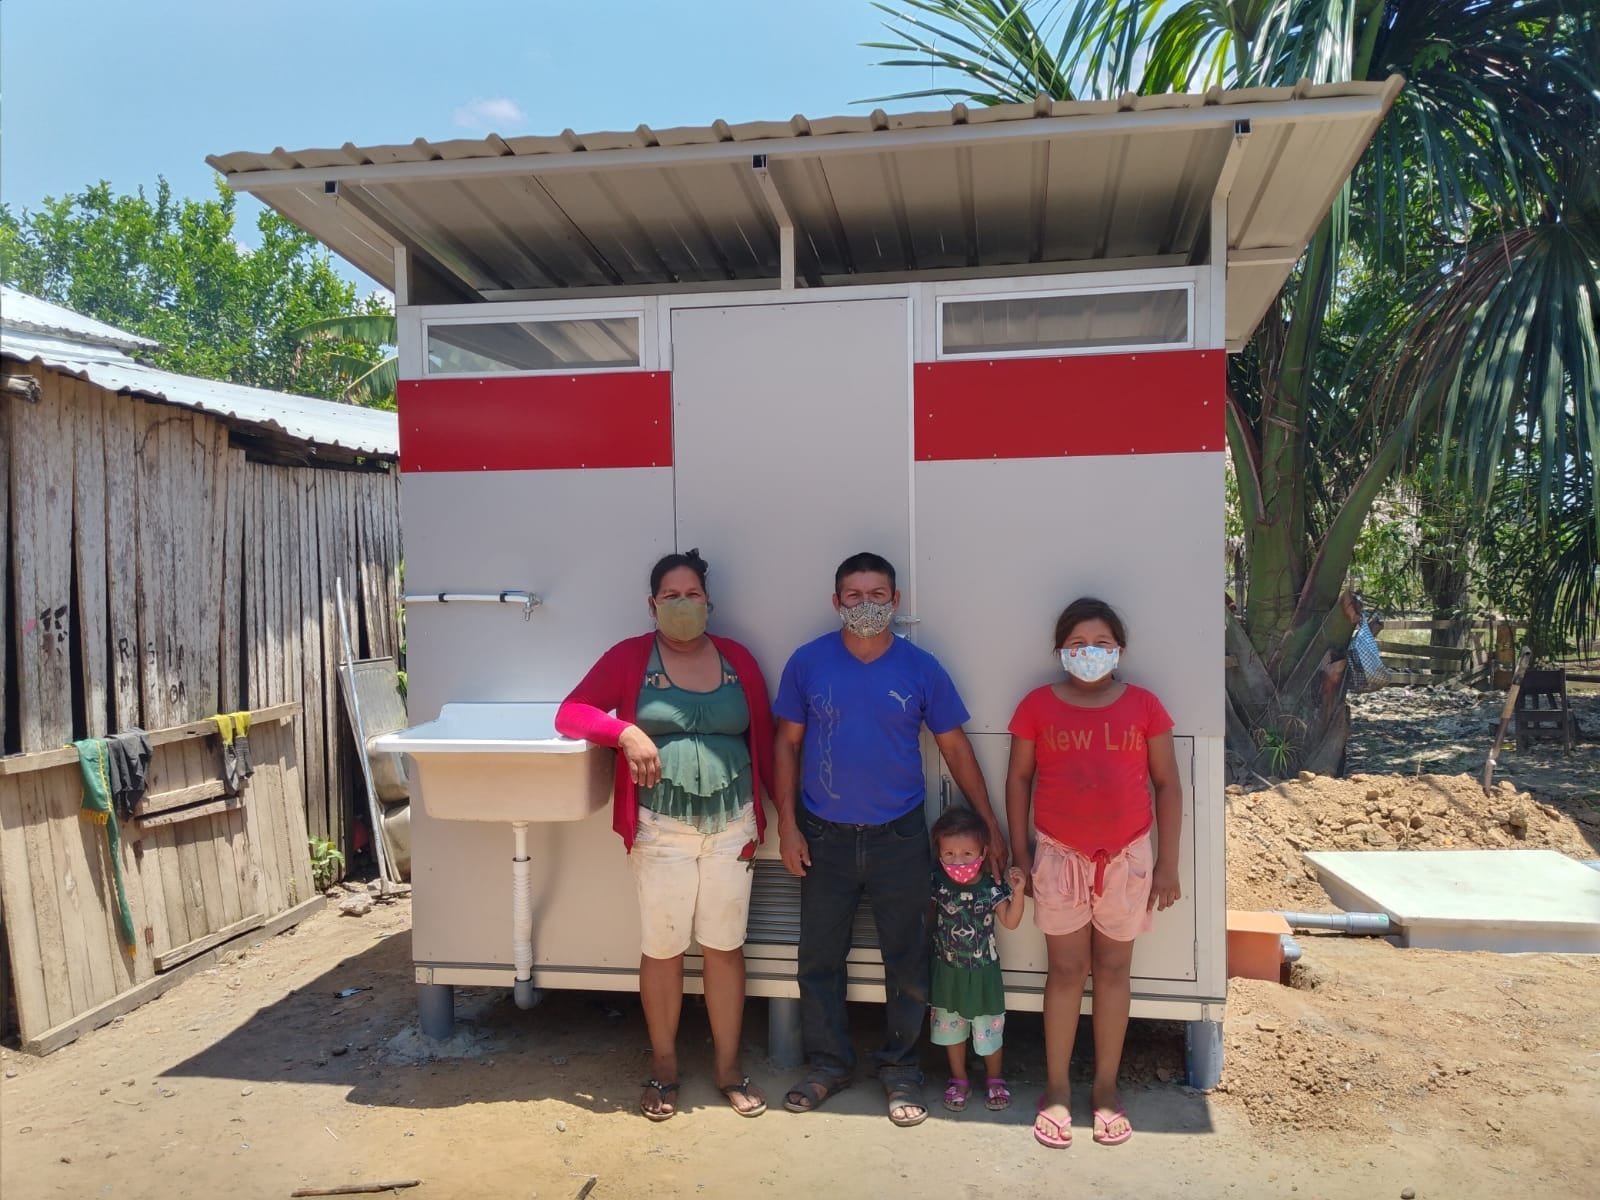  This is one extremely happy and healthy family in front of their very own bathroom! This has changed their life on so many levels, from better health and a new understanding of hygiene to implementing family values and building lasting legacies. Res